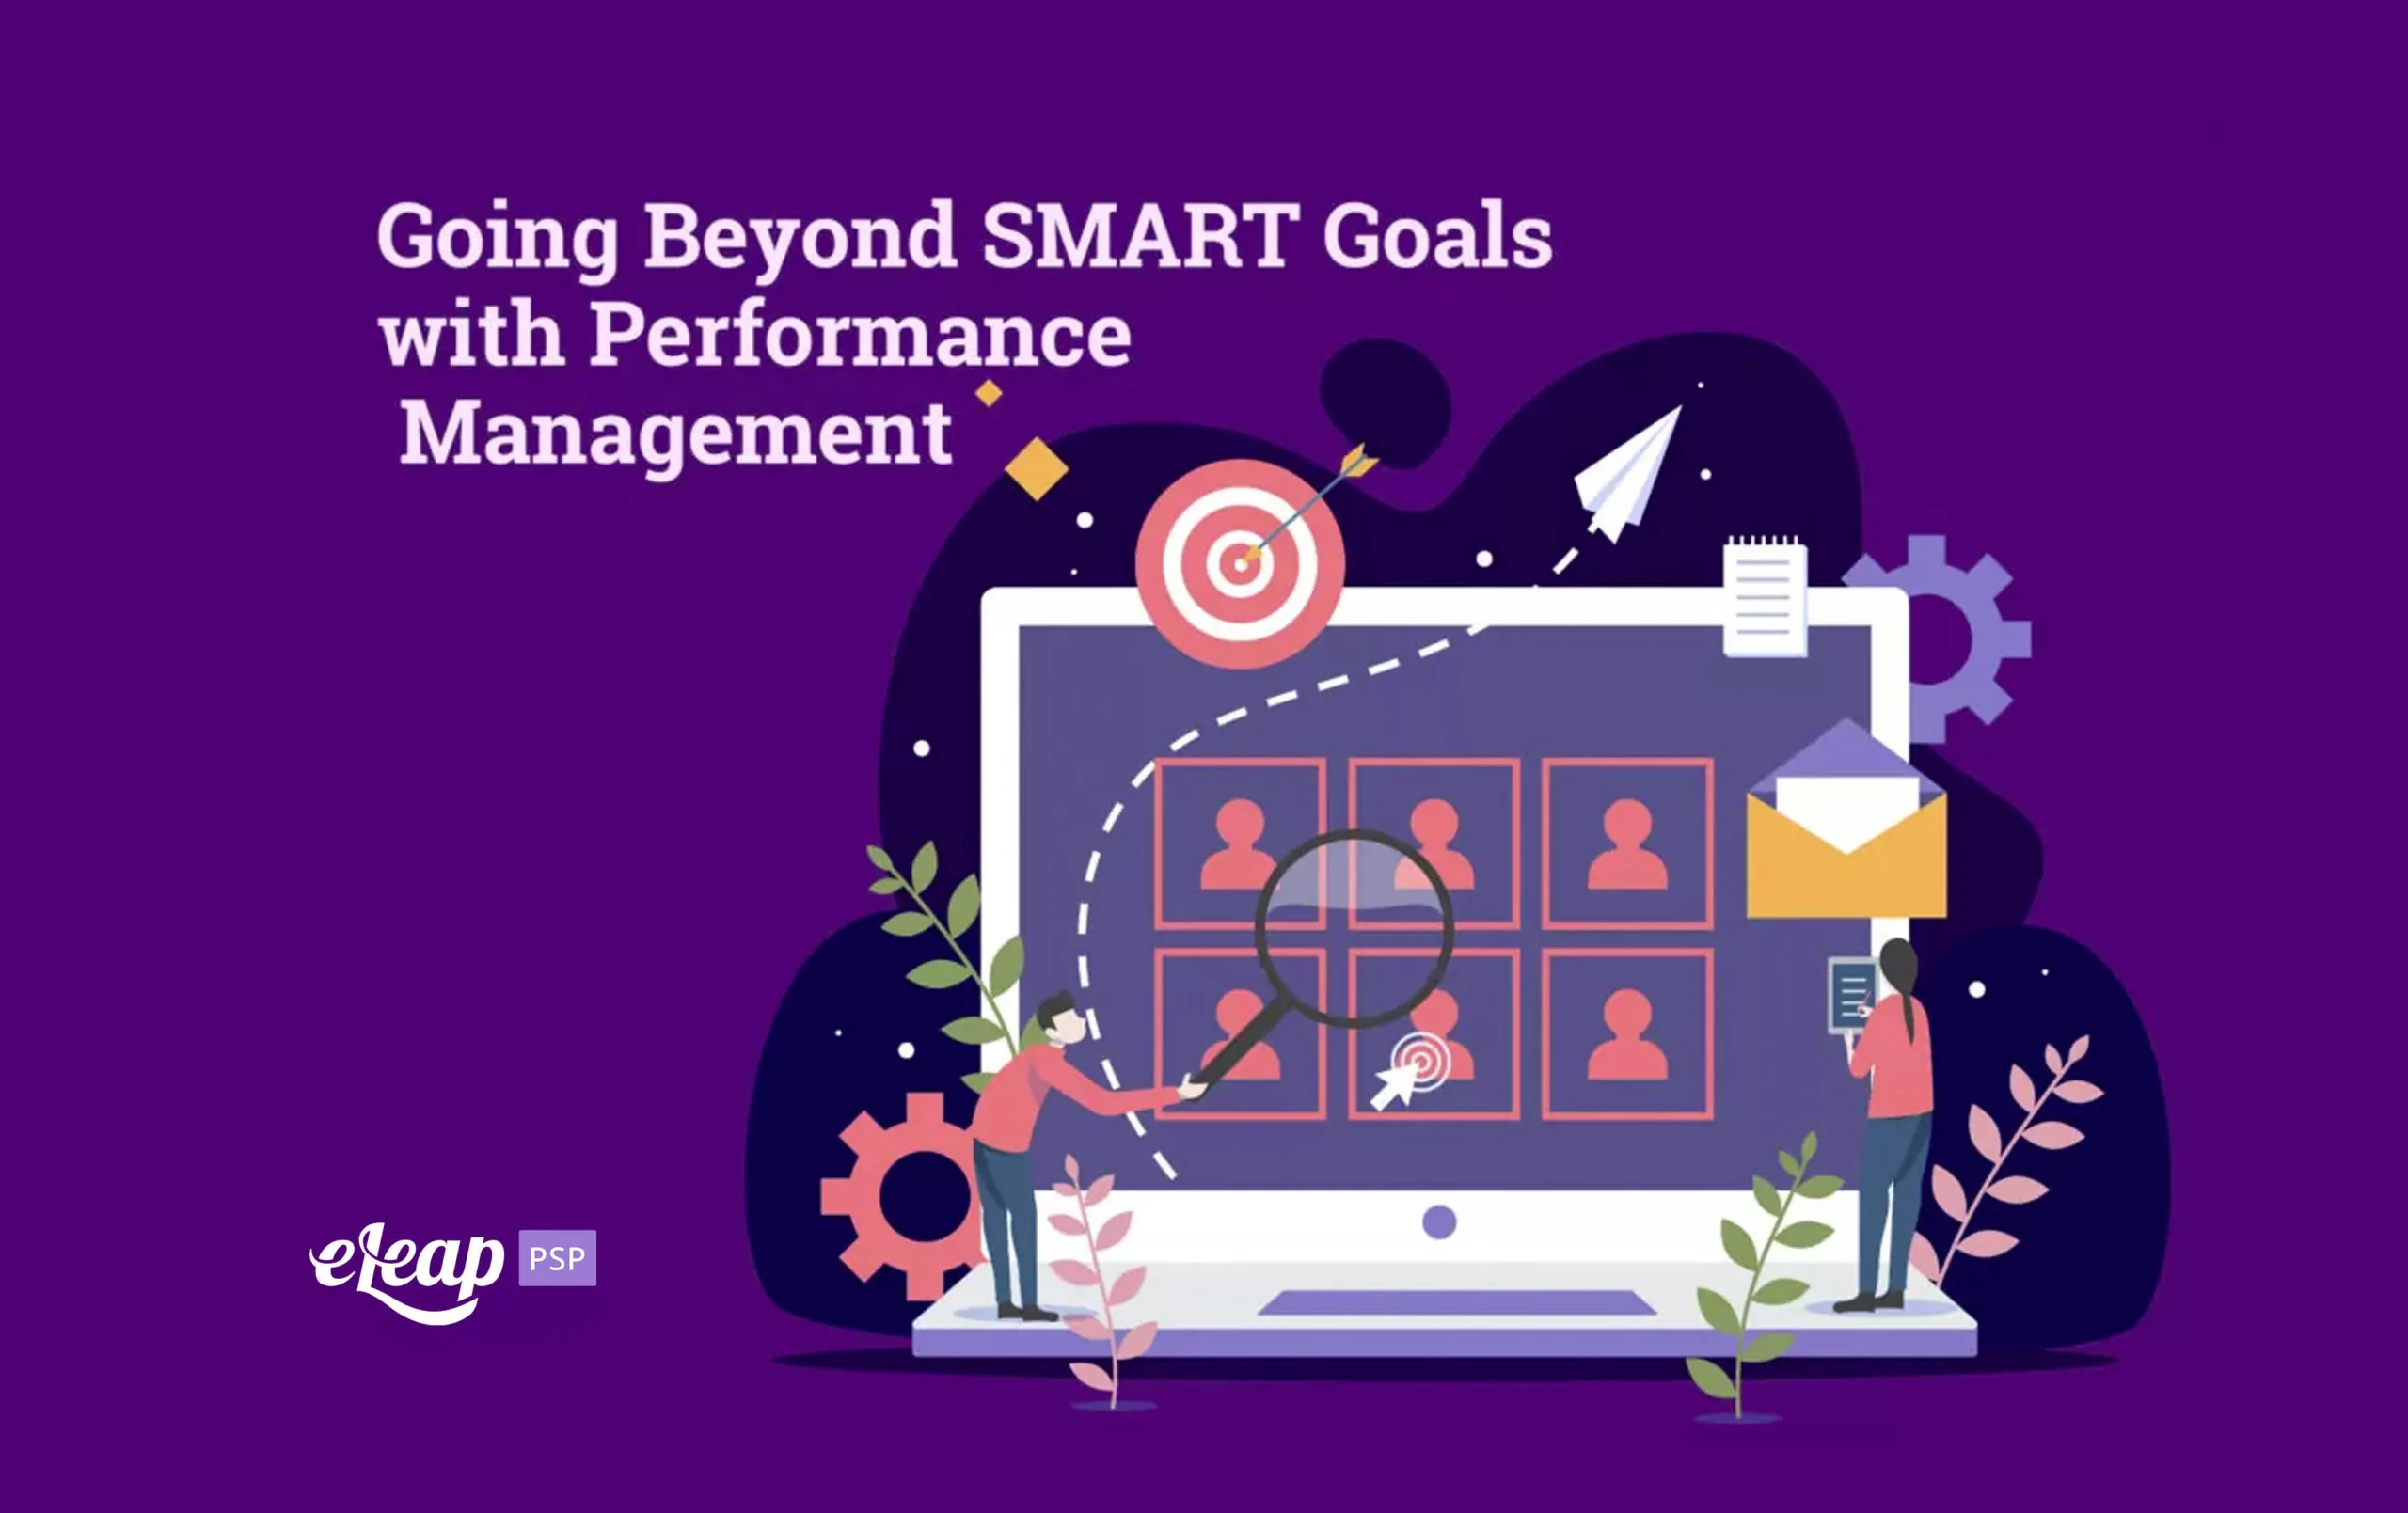 Goals with Performance Management